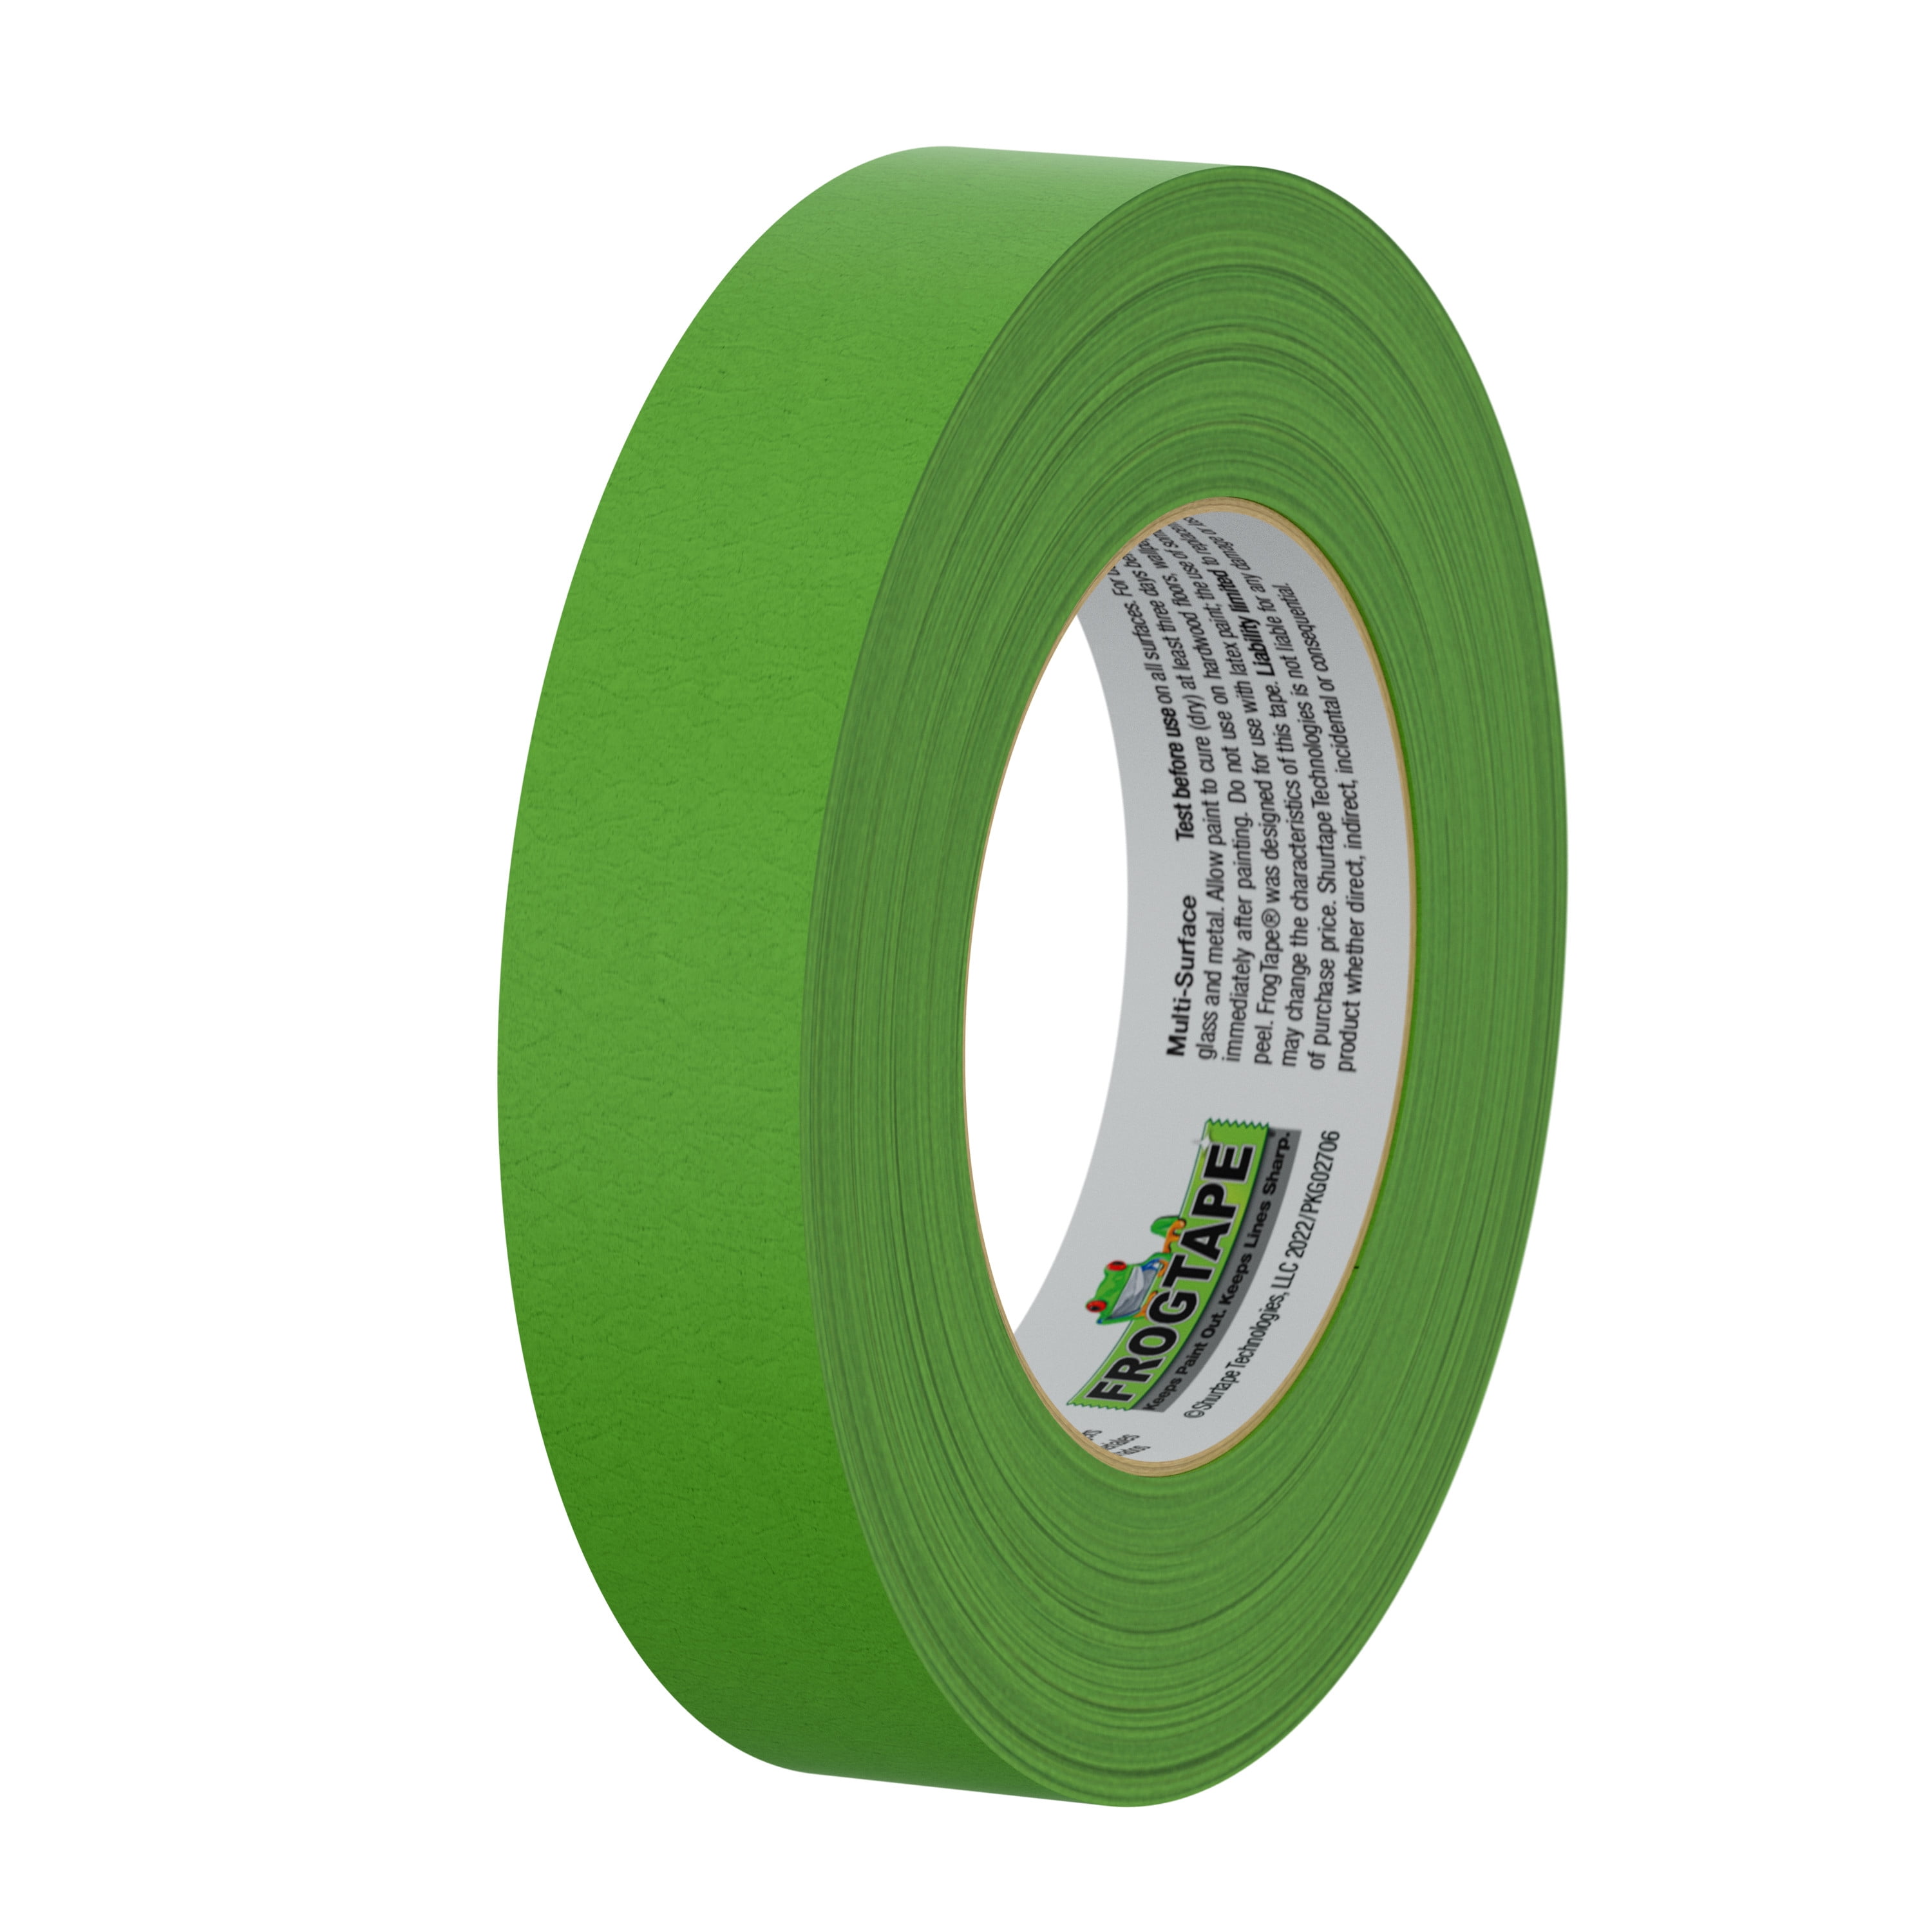 adhesive tape painter tape green tape masking tape realistic png isolated  on transparent background asset for graphic design Stock Illustration